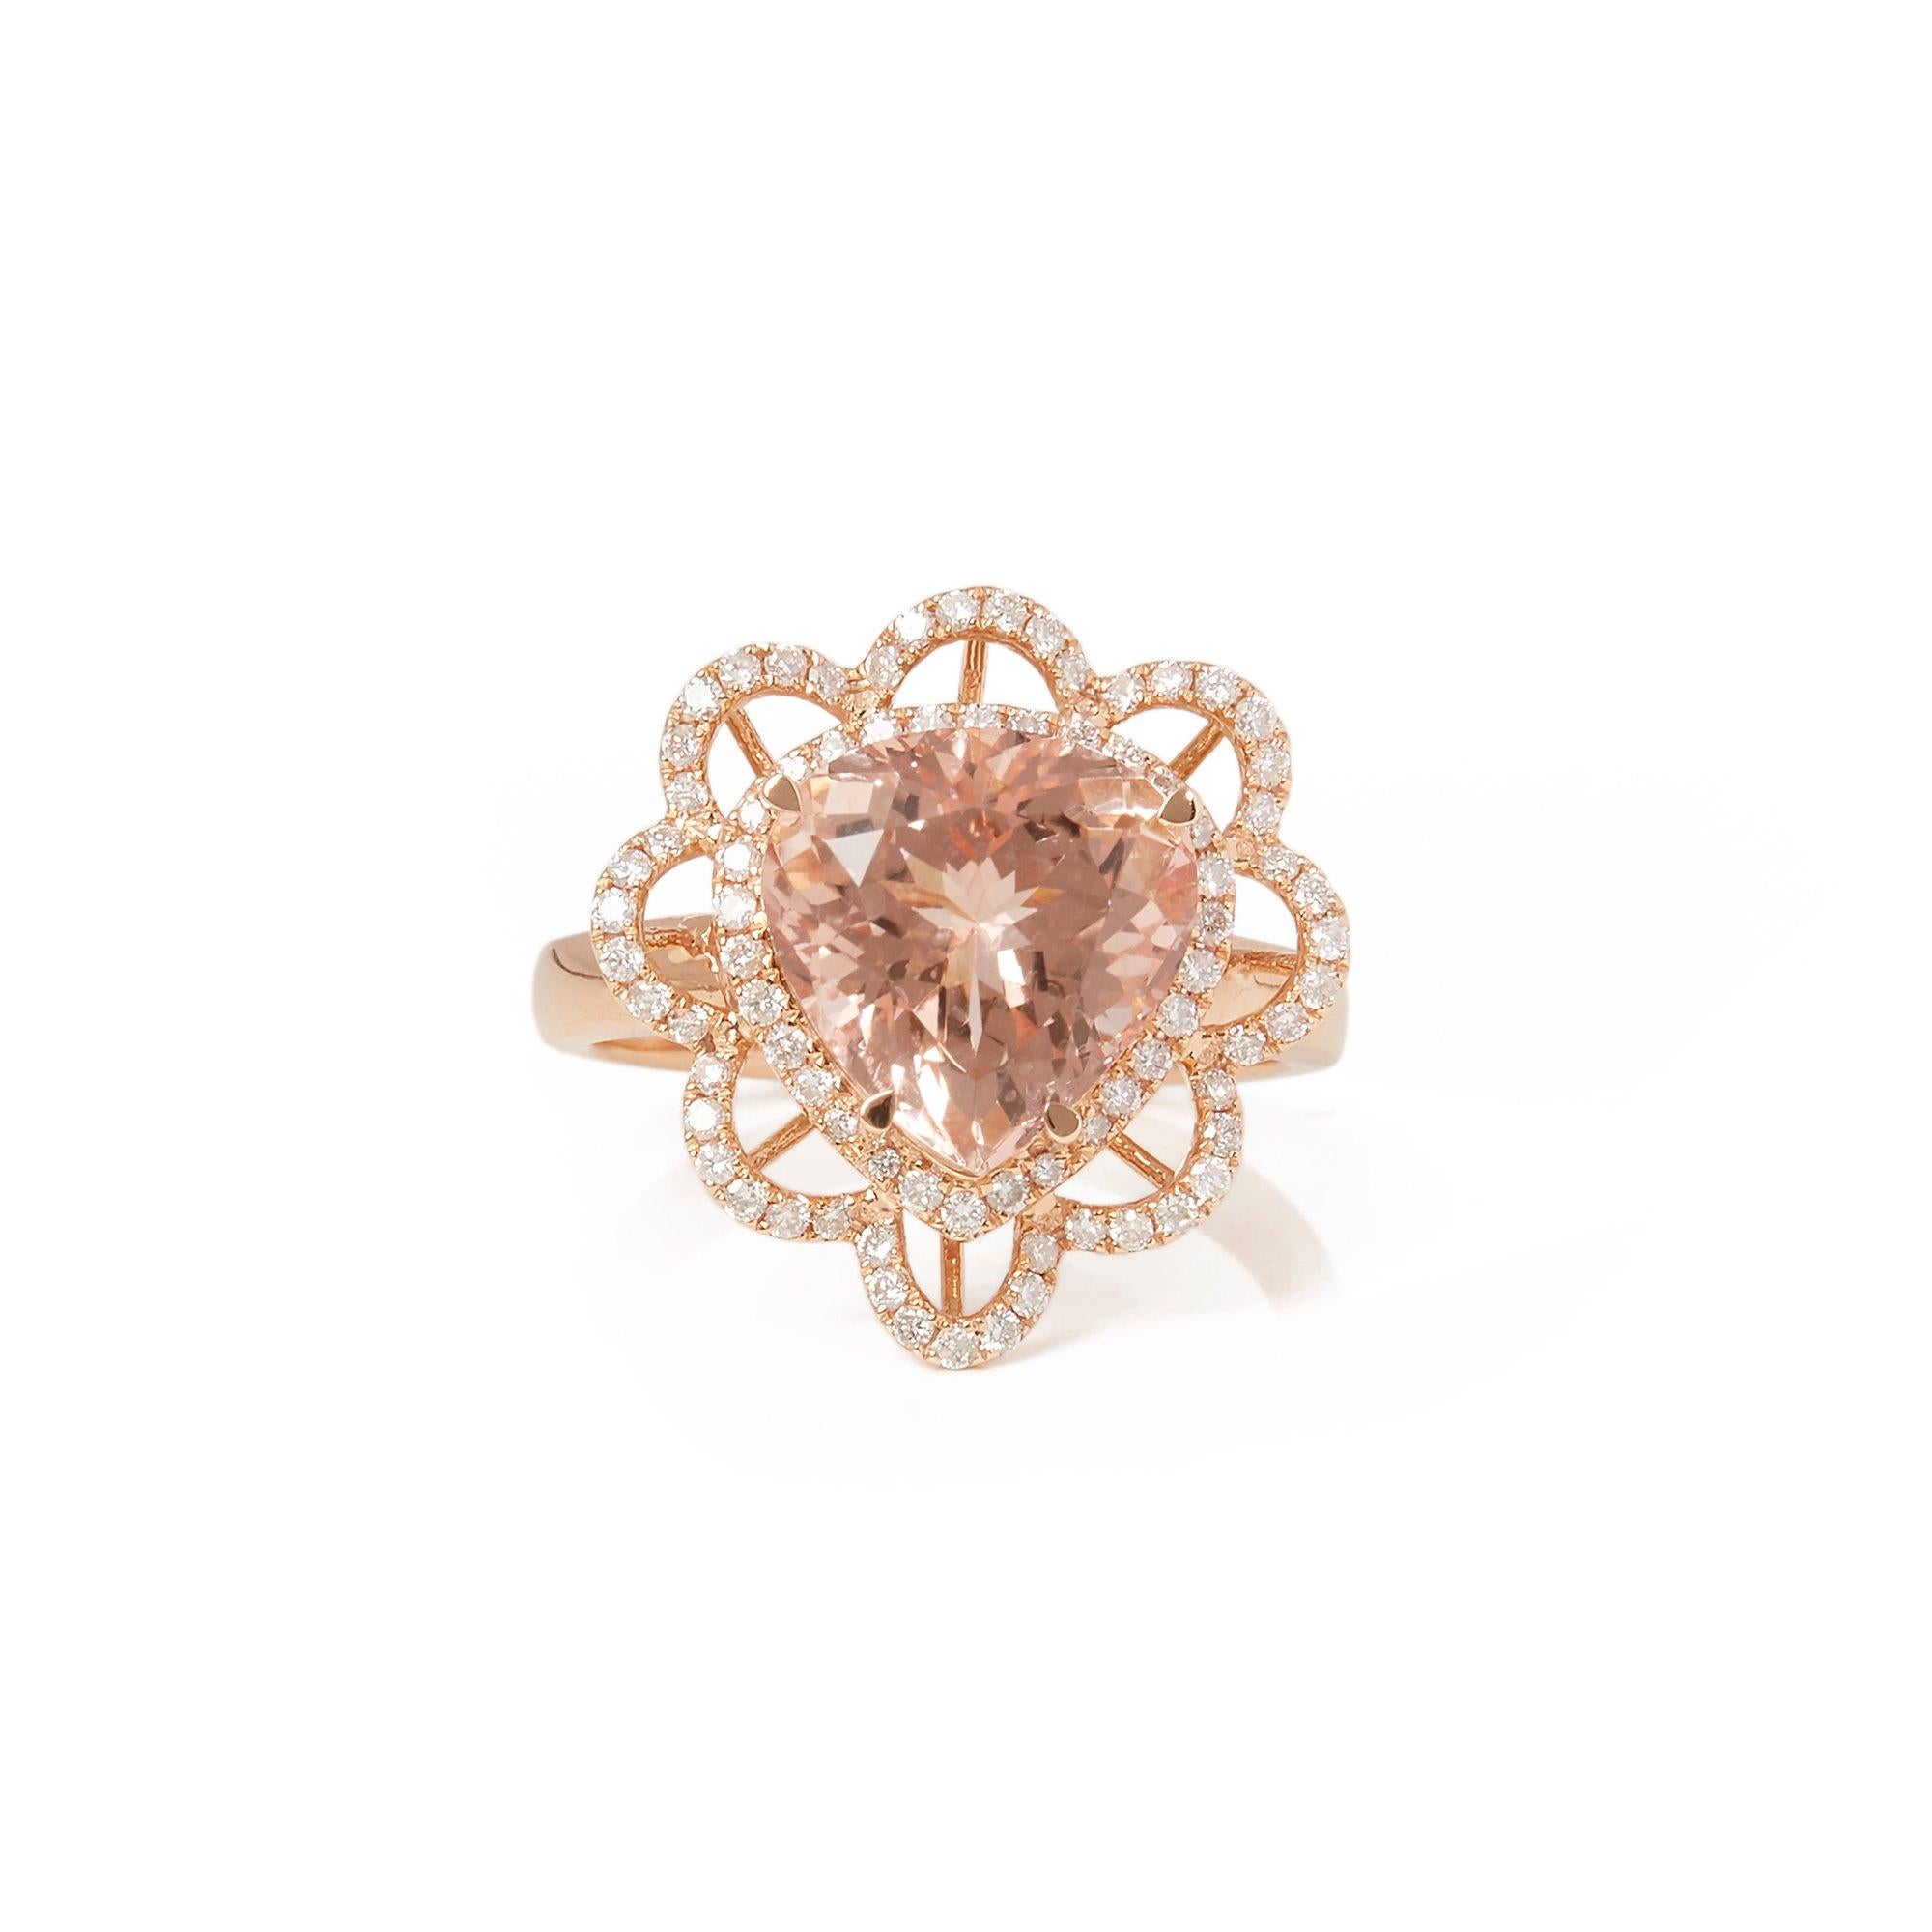 This ring designed by David Jerome is from his private collection and features one trilliant cut morganite totalling 4.88cts sourced in Brazil. Set with round brilliant cut diamonds totalling 0.45cts mounted in an 18k rose gold setting. Finger size